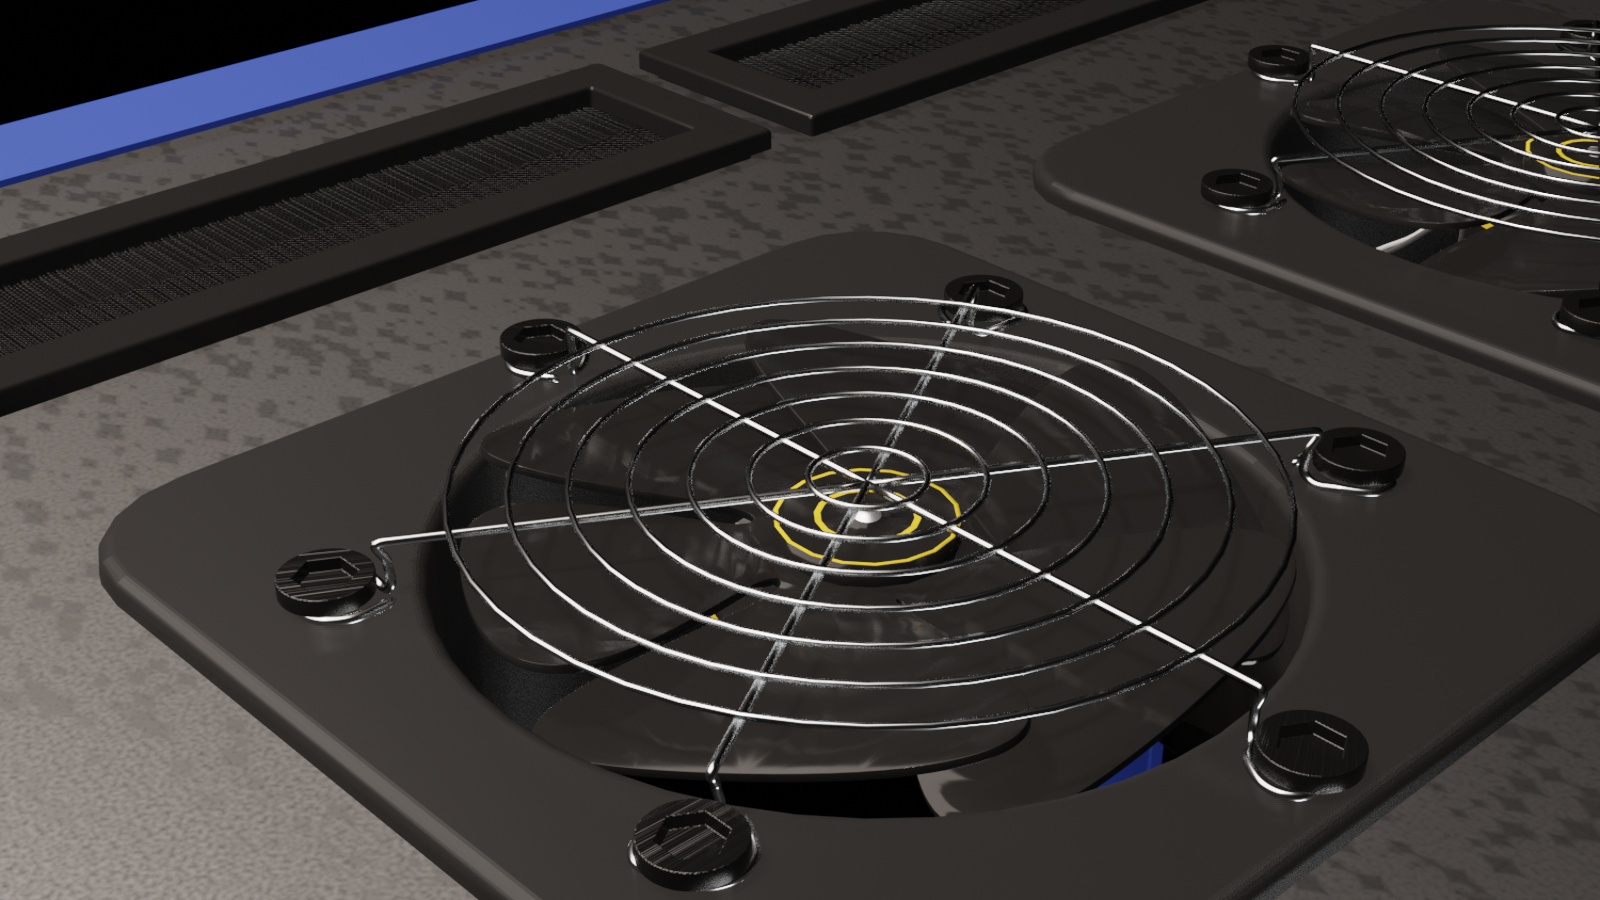 Detail 3D render of a cooling fan on the top of a server cabinet